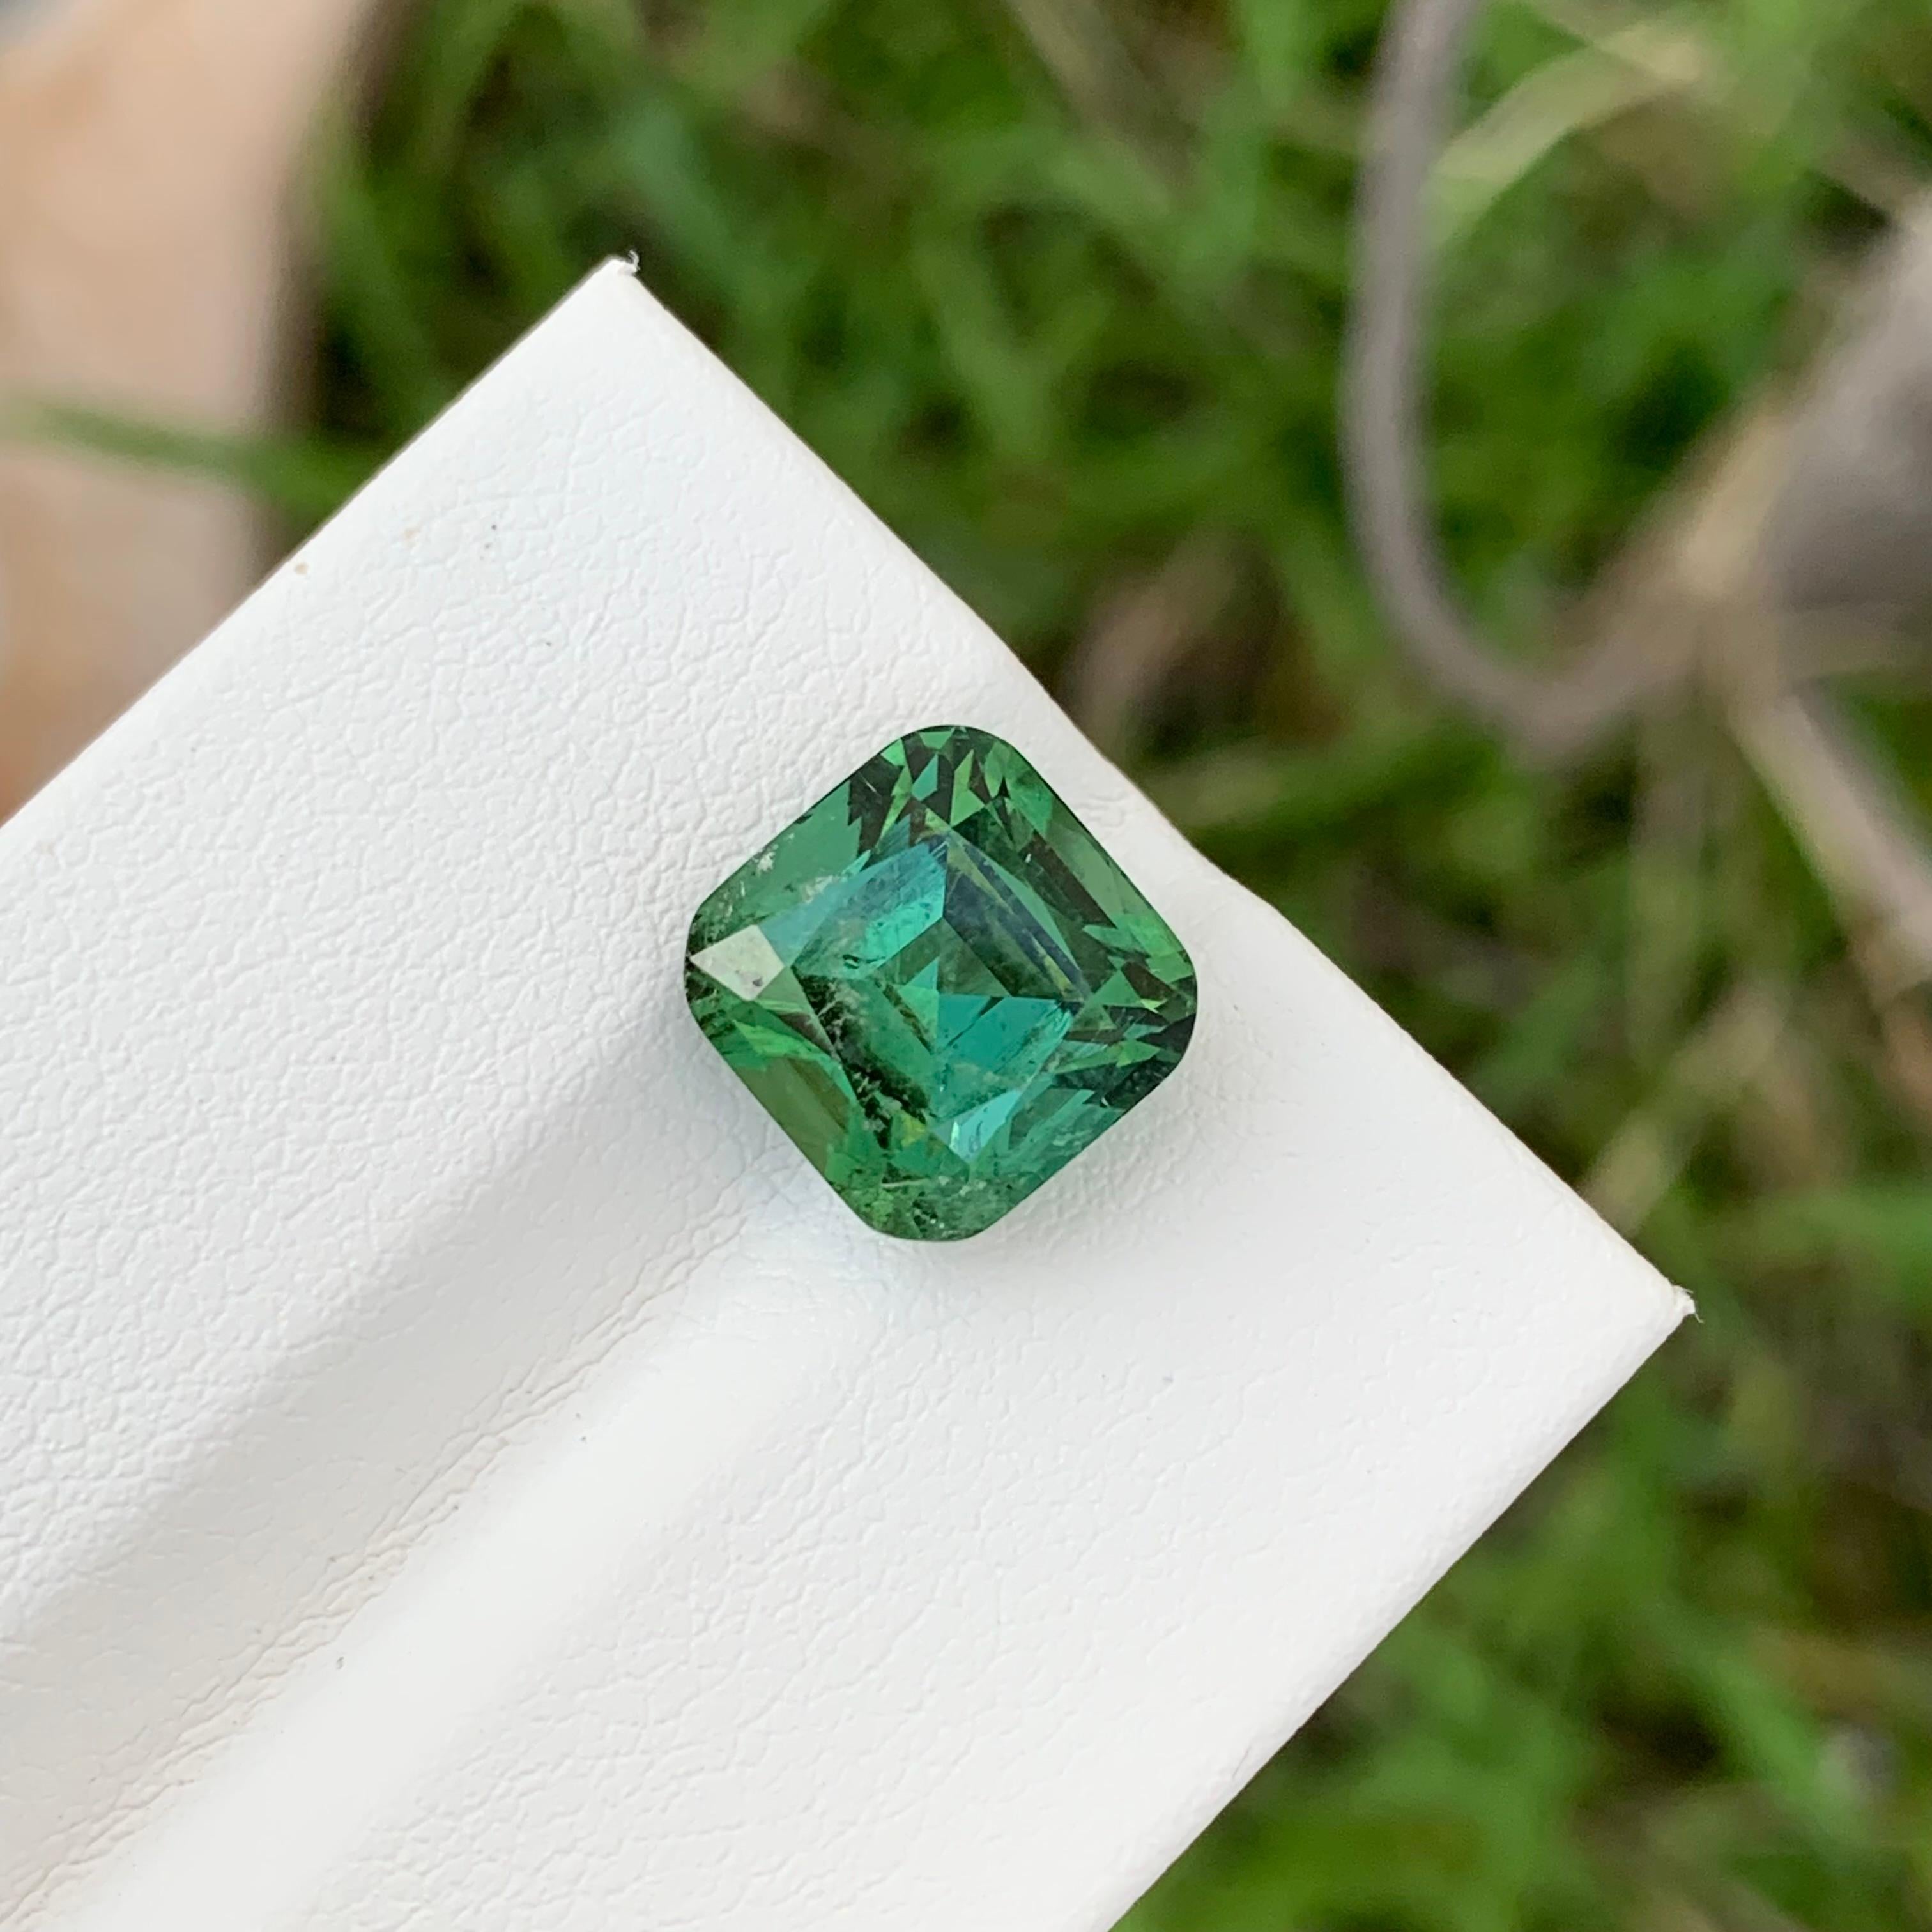 Loose Green Tourmaline

Weight: 5.55 Carats
Dimension: 9.4 x 9.2 x 8 Mm
Colour: Green lagoon
Origin: Afghanistan
Shape: Cushion
Certificate: On Demand
Treatment: Non

Tourmaline is a captivating gemstone known for its remarkable variety of colors,